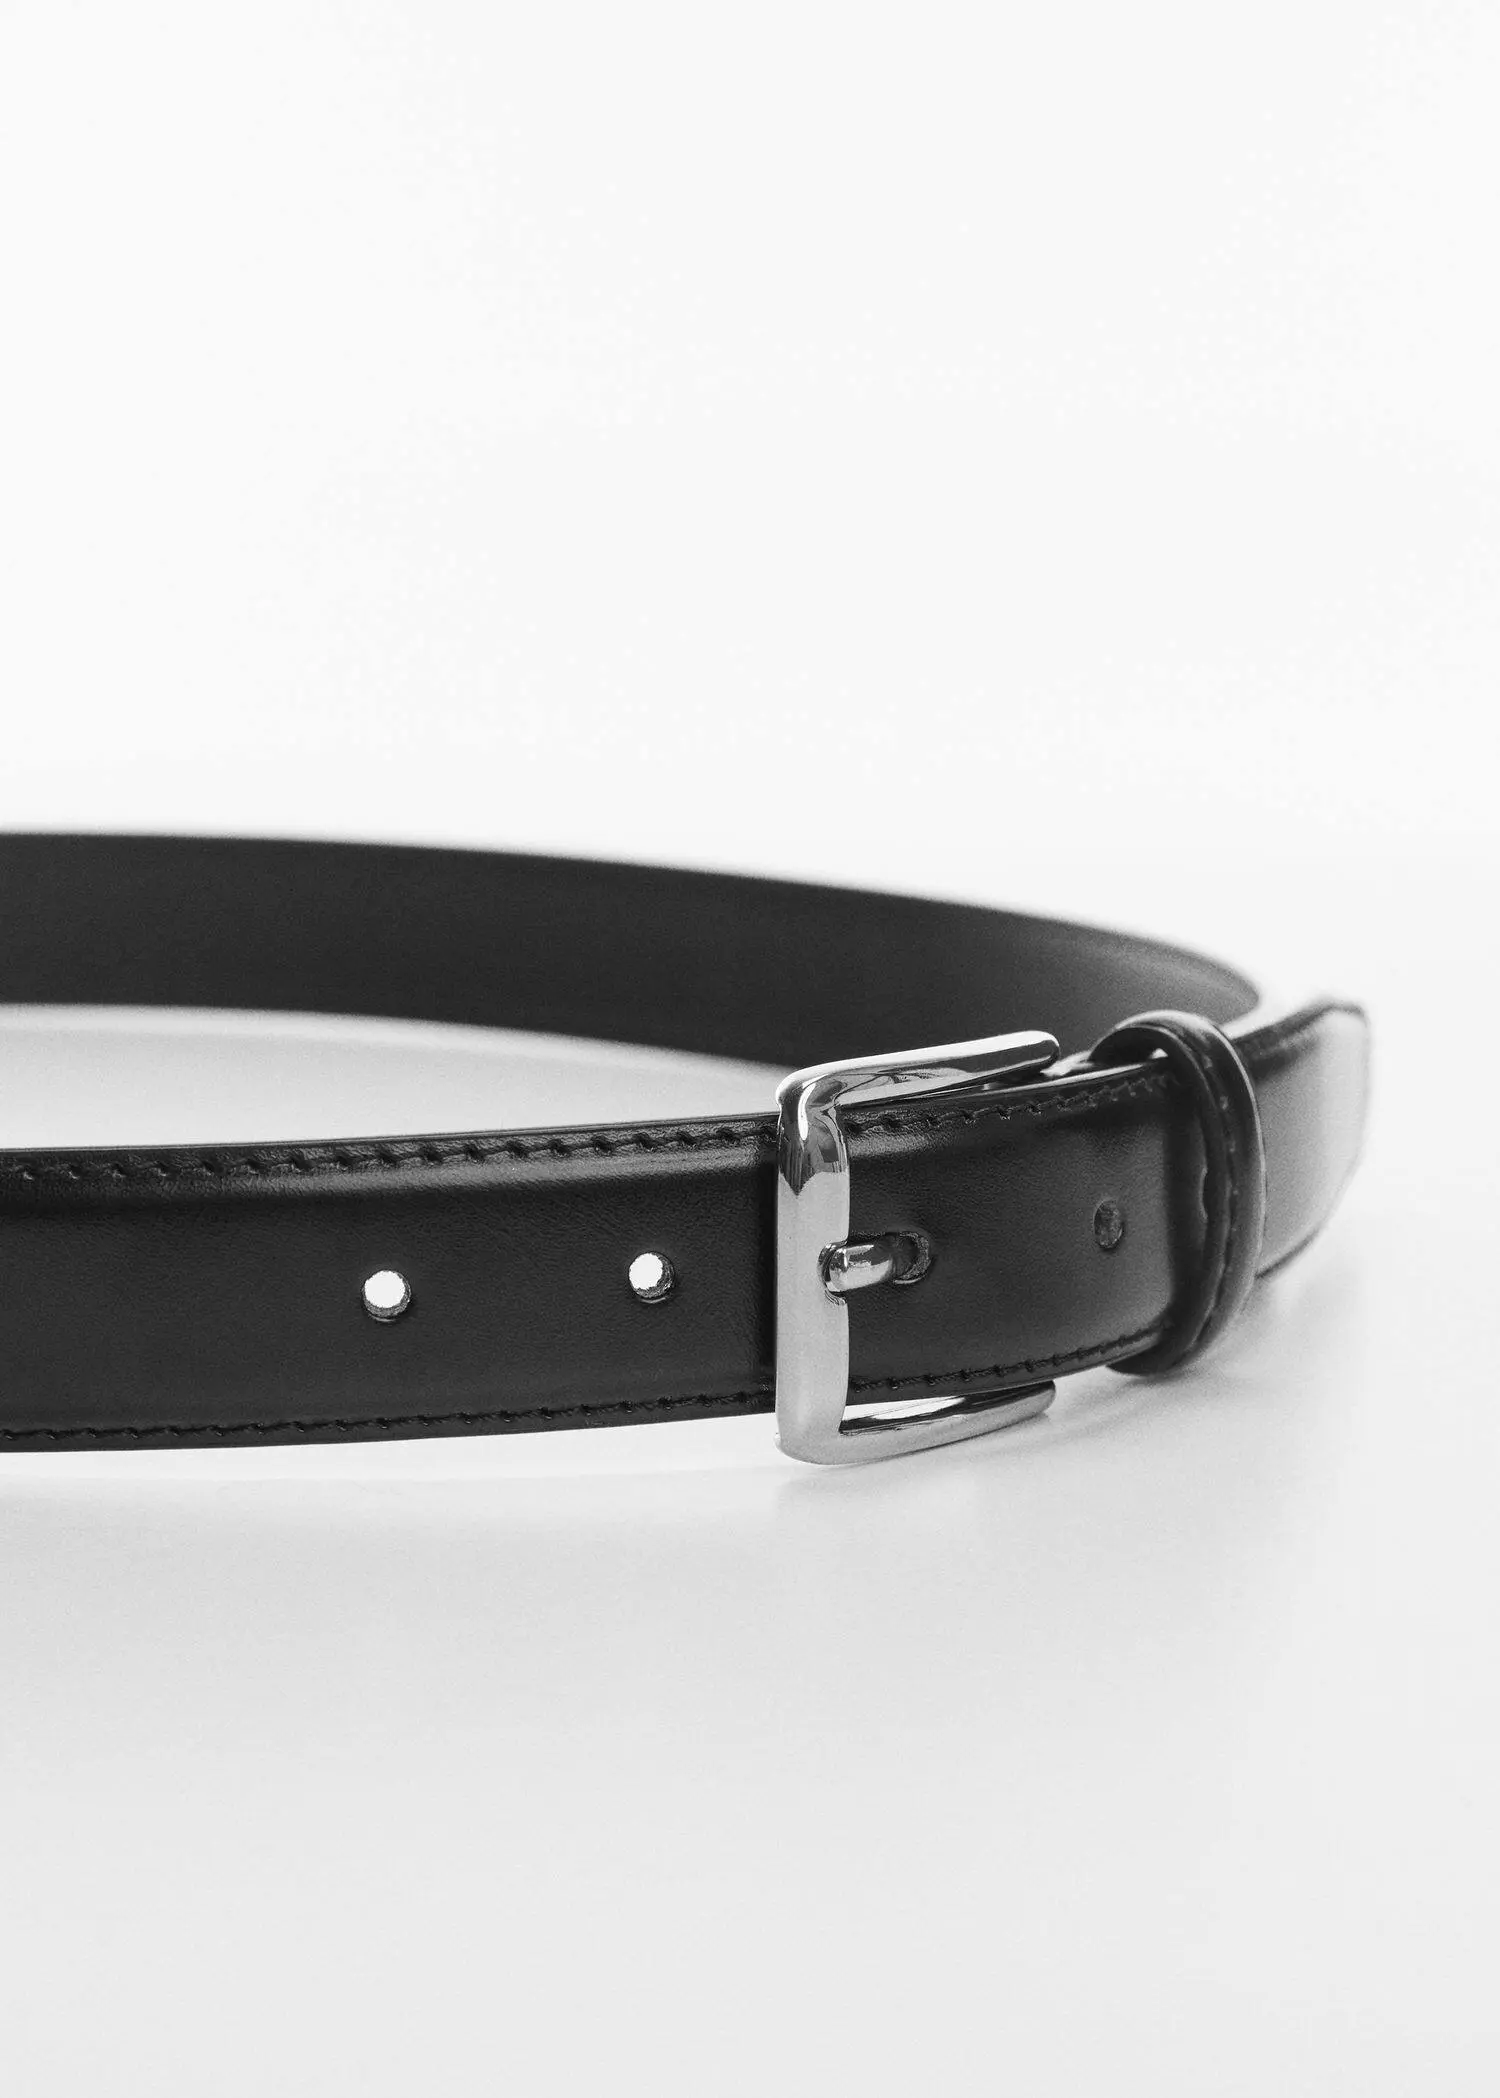 Mango Leather belt. a close-up of a black leather belt with a silver buckle. 